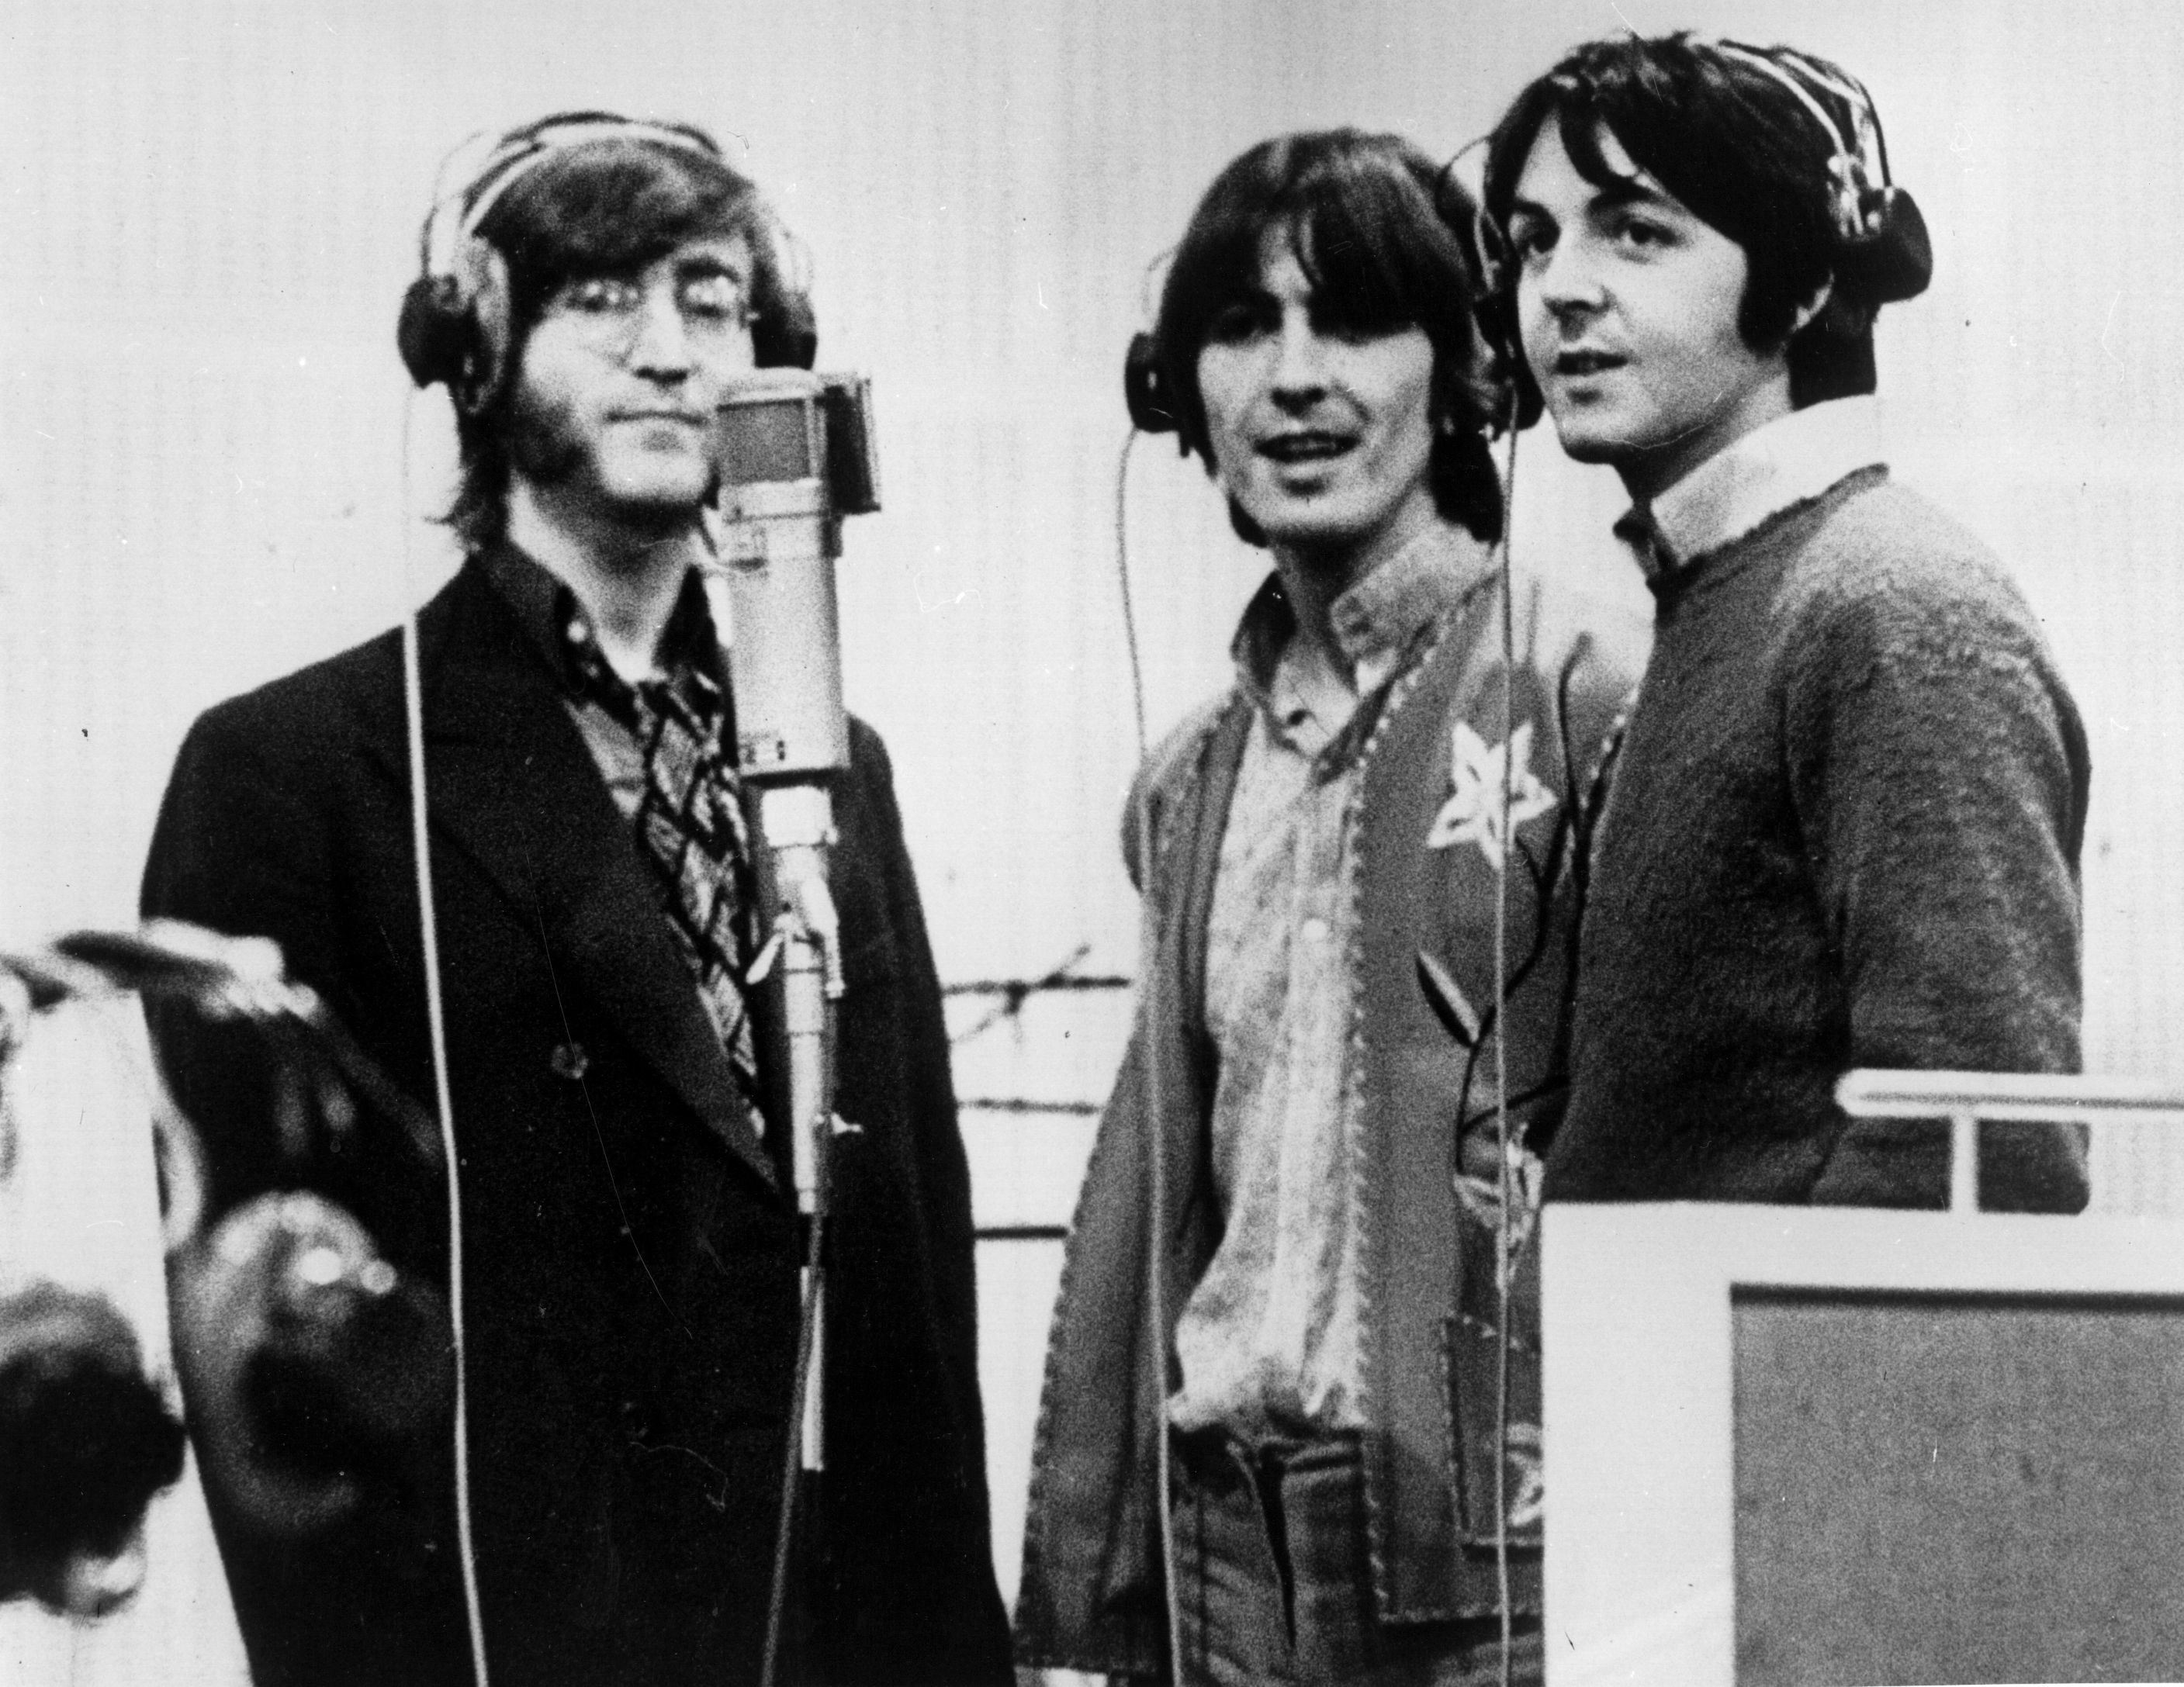 The Beatles’ John Lennon, George Harrison, and Paul McCartney with a microphone